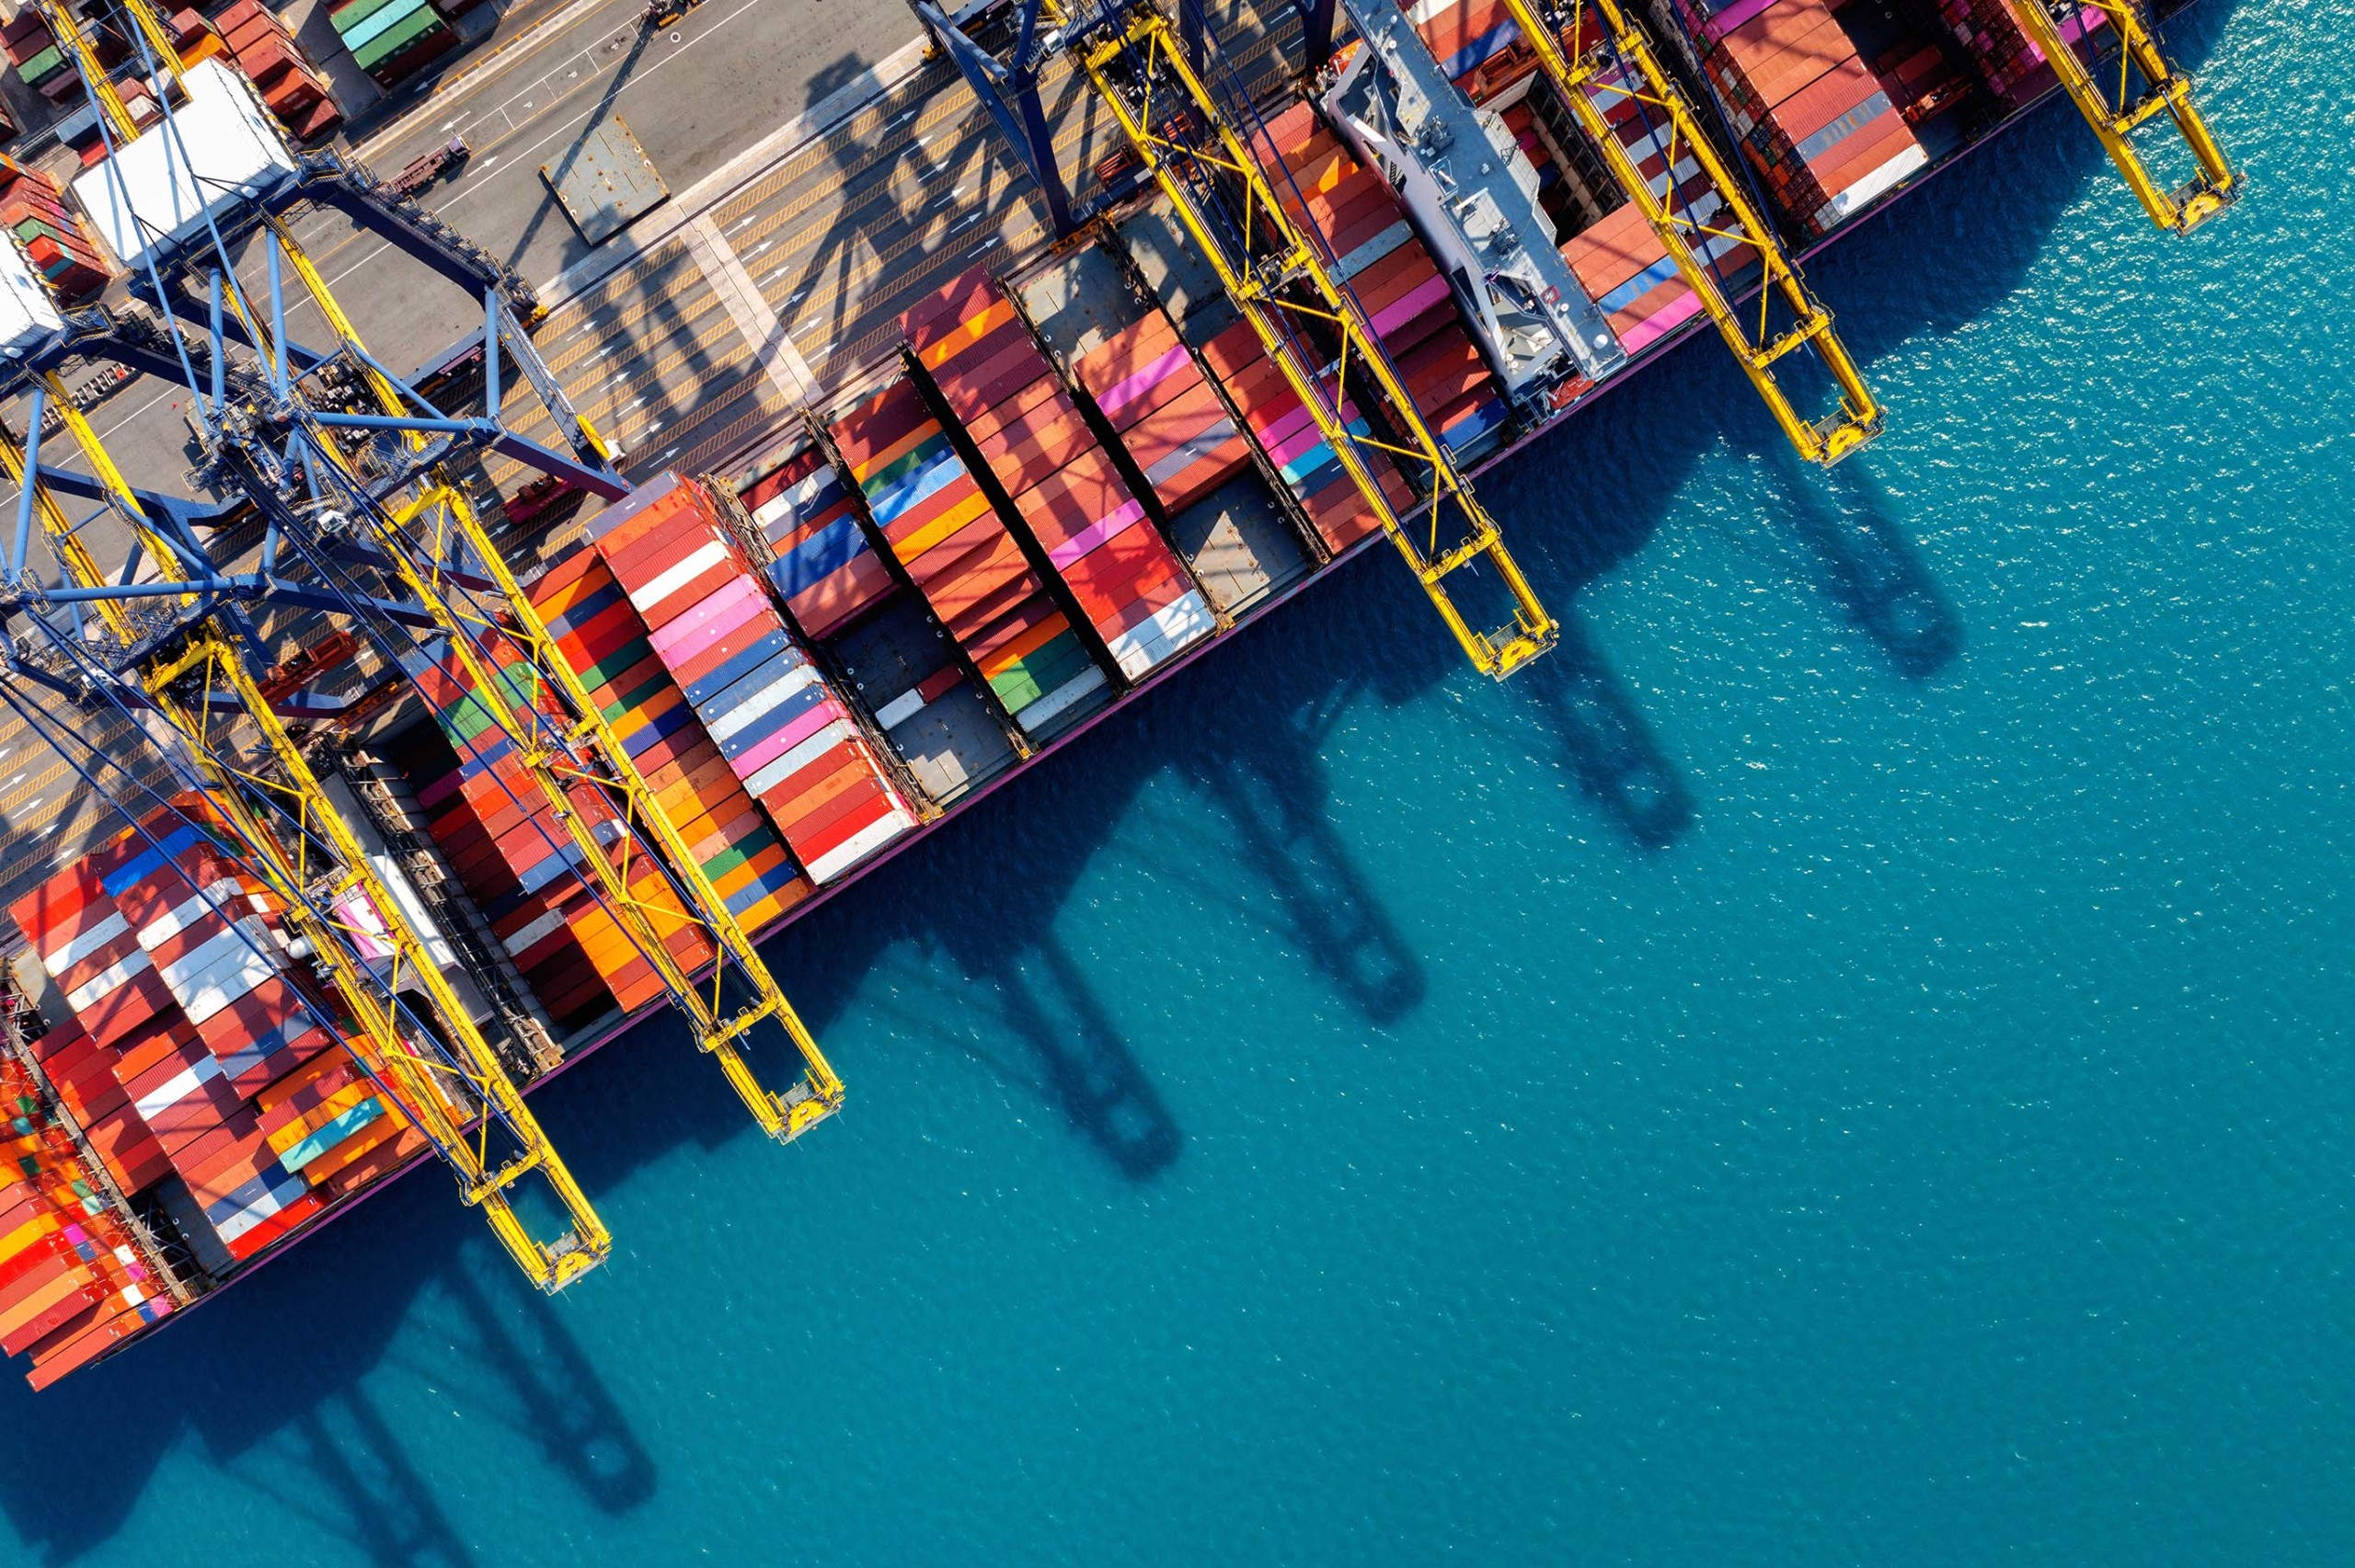 aerial view of cargo ship and cargo container in harbor